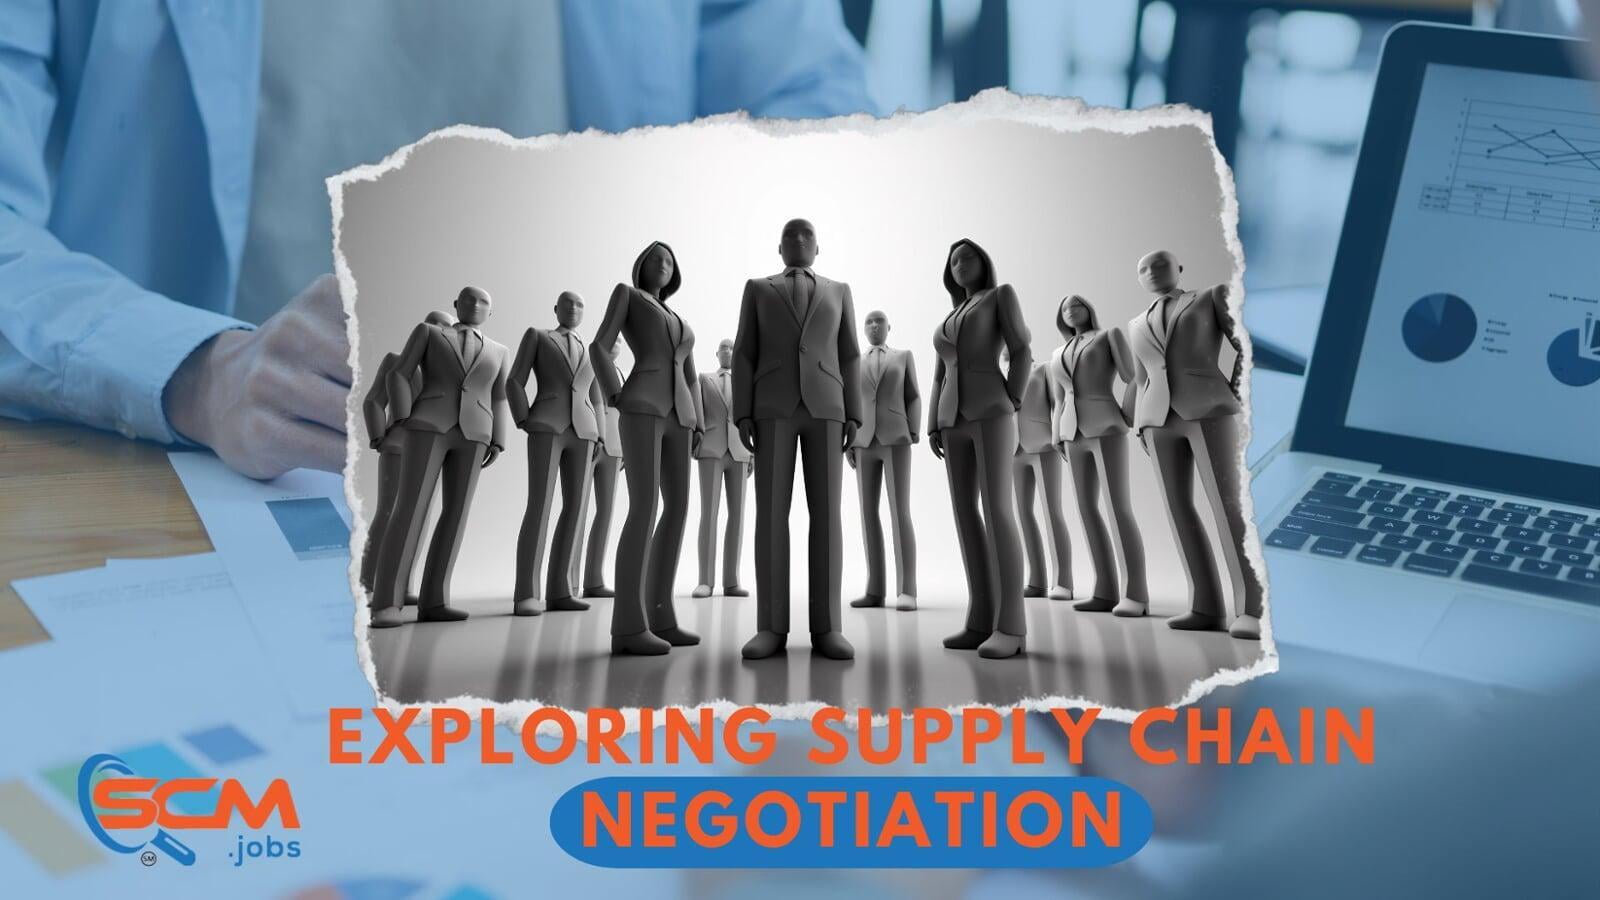 The Power of Teamwork: Exploring Supply Chain Negotiation